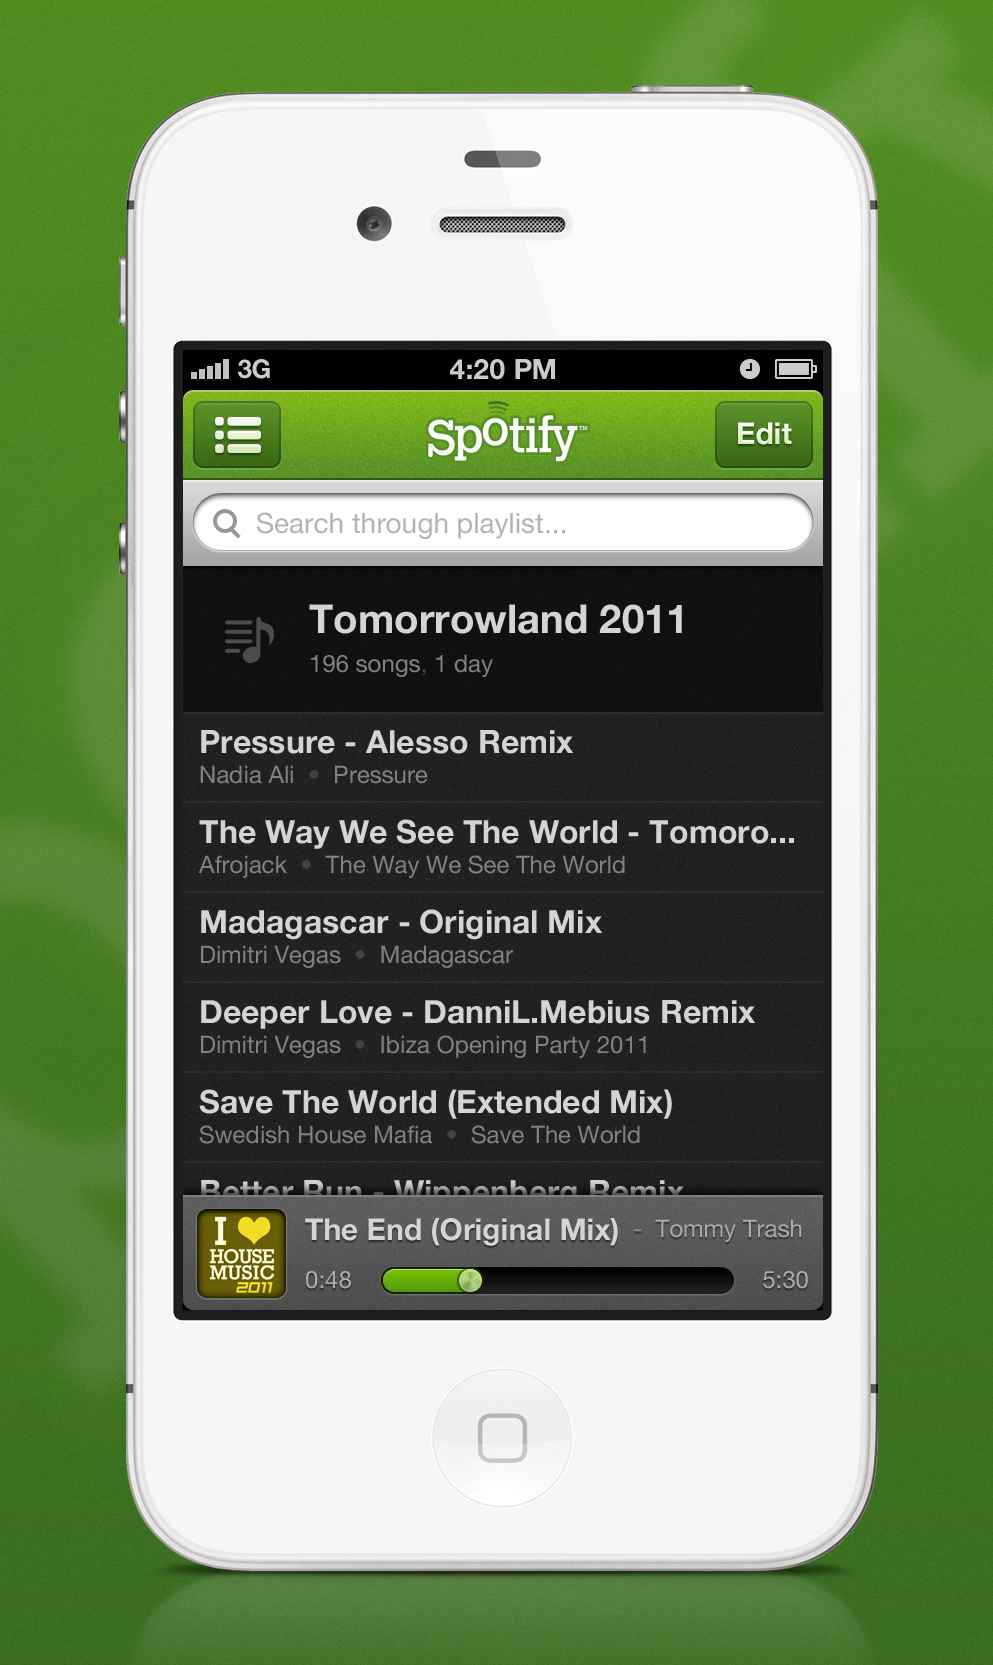 Download songs from spotify free windows